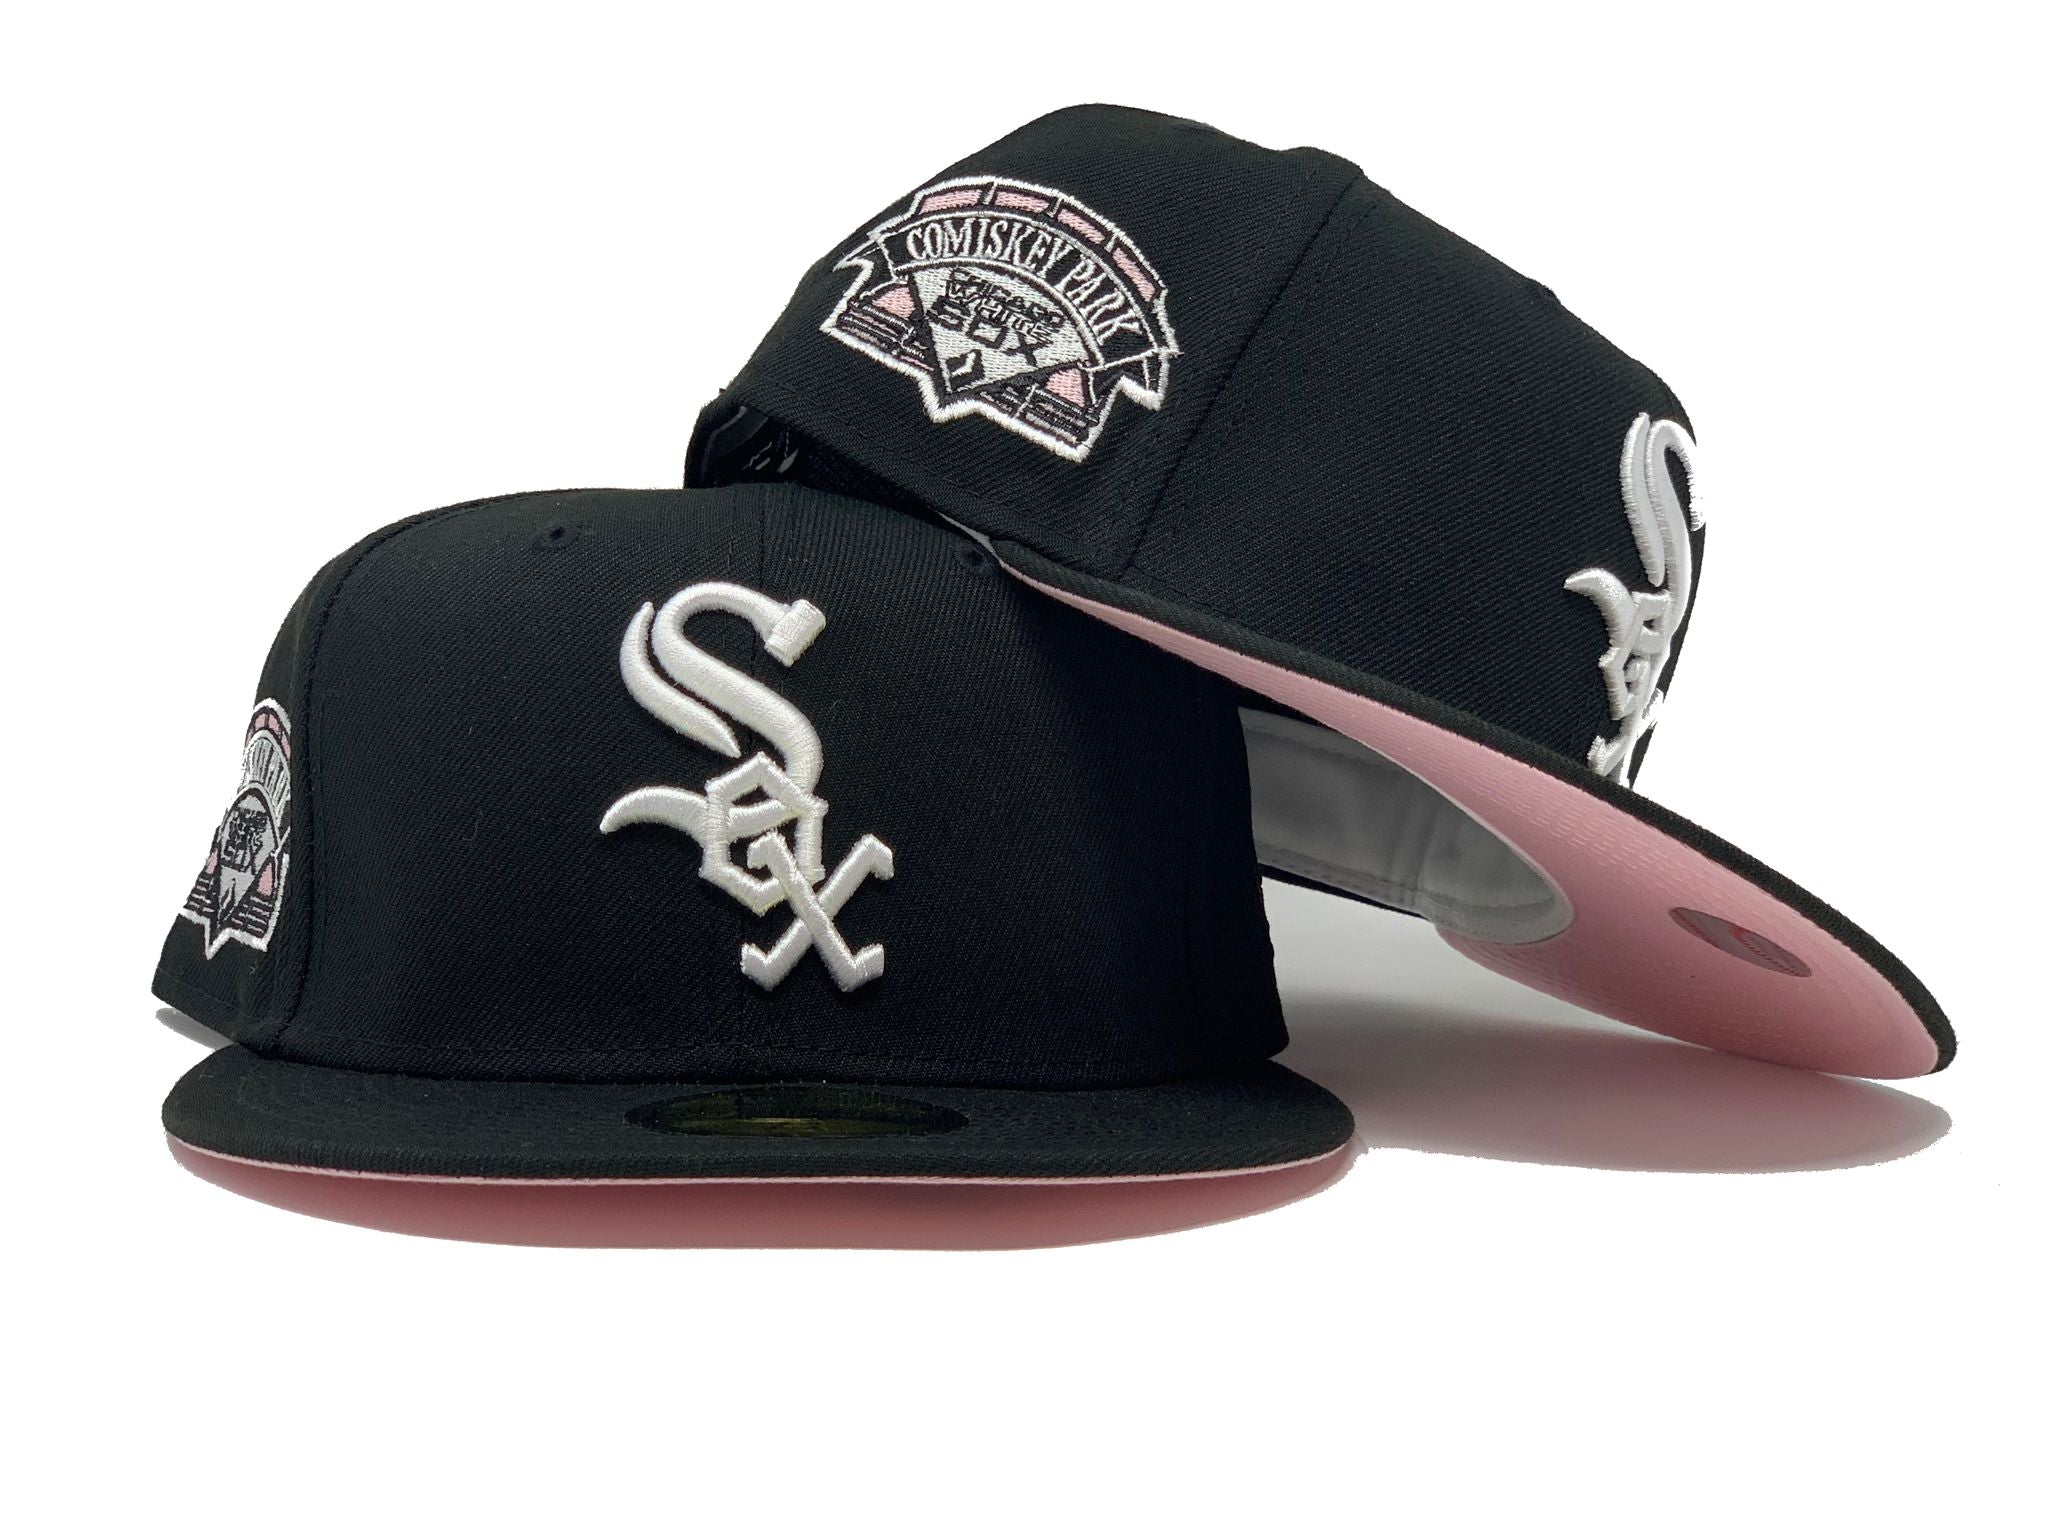 Chicago White Sox COMISKEY PARK New Era 59Fifty Fitted Hat Black Grey Under  Brim 